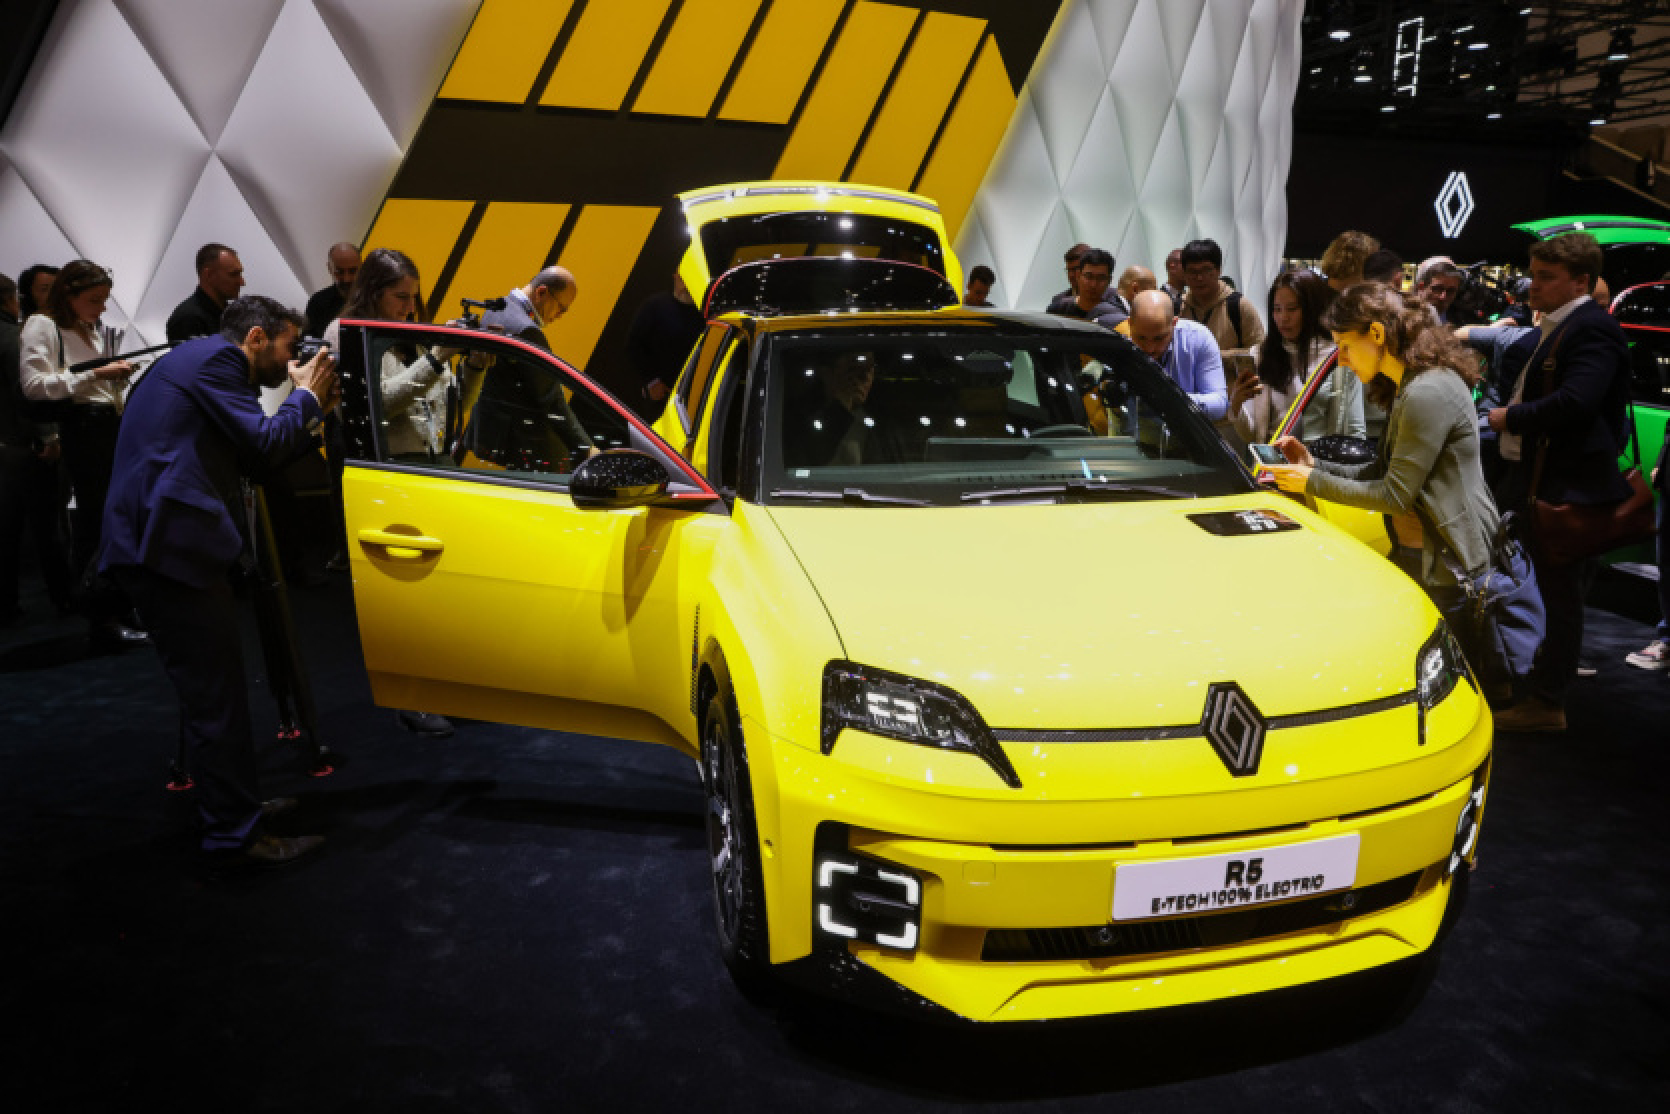 The R5 E-Tech is Renault's new €25,000 electric car with a wicker baguette basket. It's a remake of the classic model